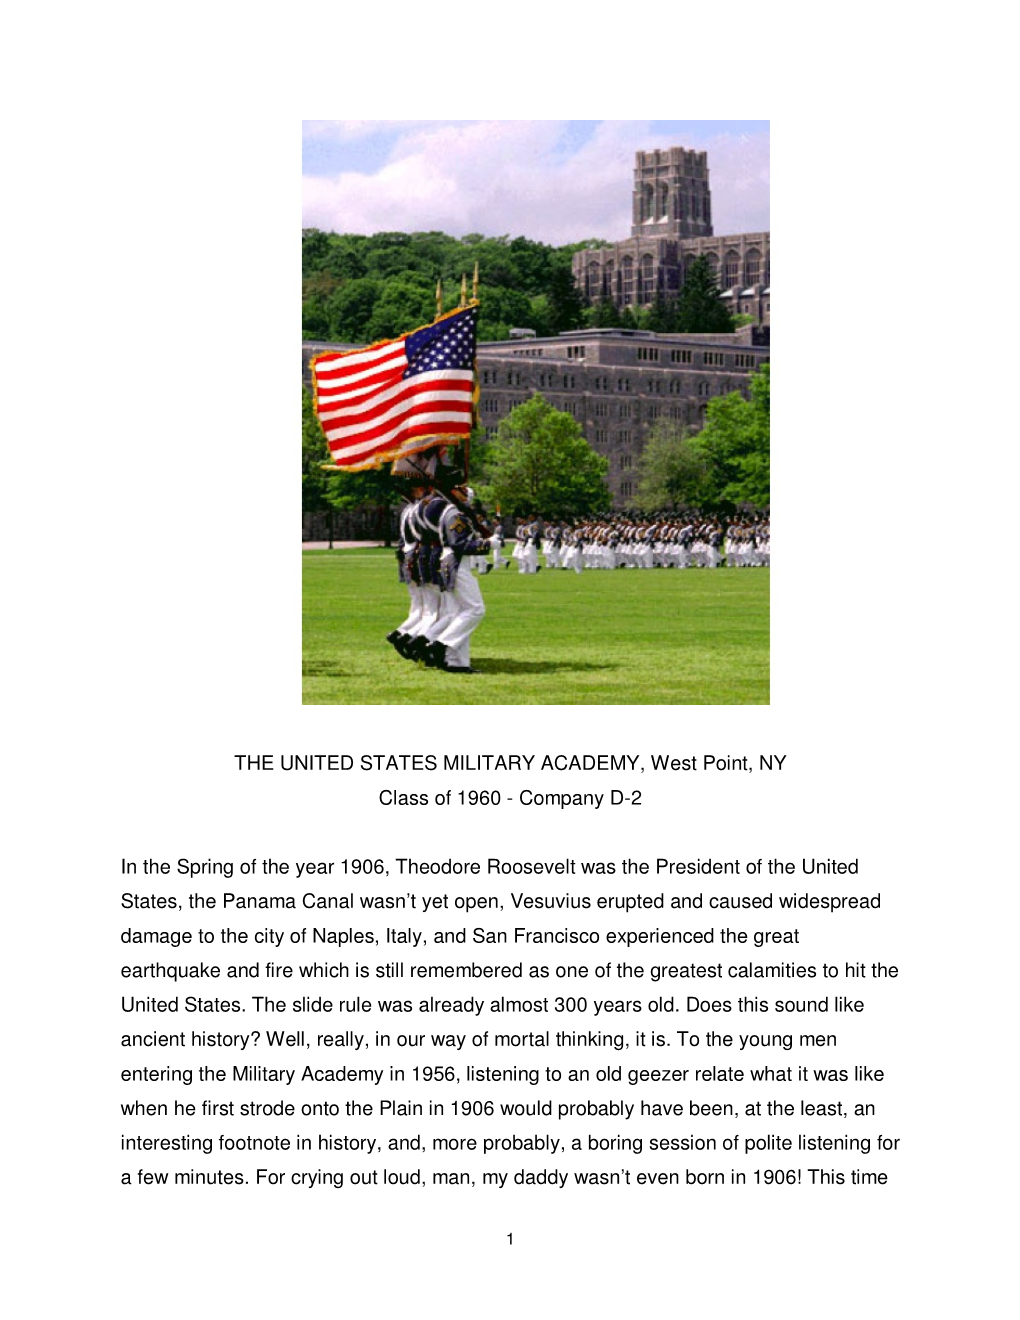 THE UNITED STATES MILITARY ACADEMY, West Point, NY Class of 1960 - Company D-2